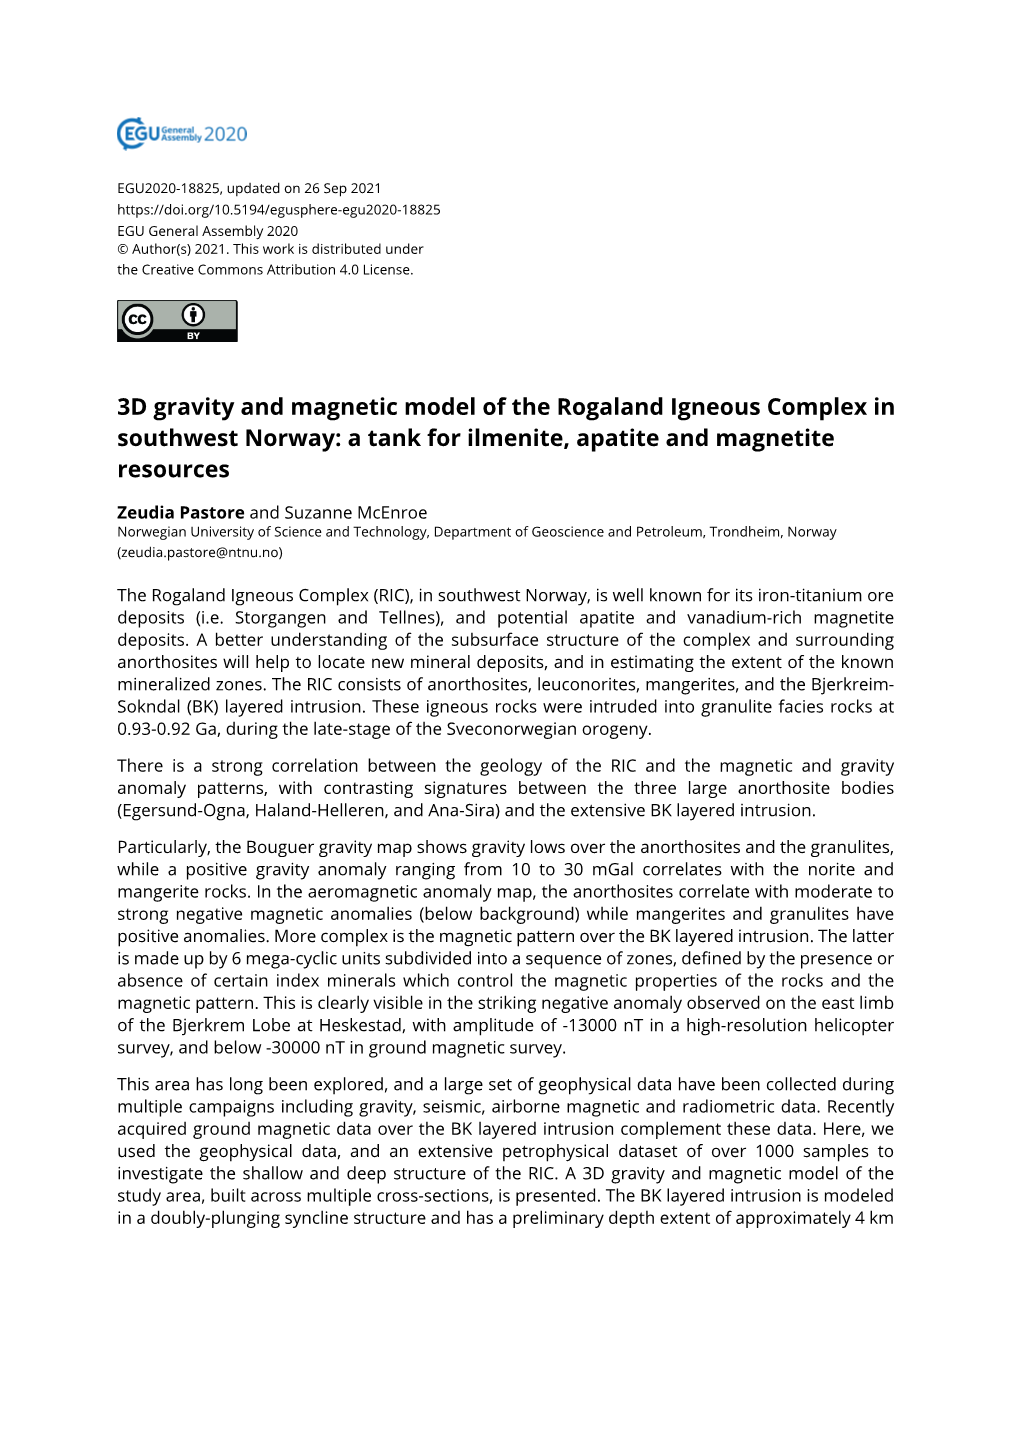 3D Gravity and Magnetic Model of the Rogaland Igneous Complex in Southwest Norway: a Tank for Ilmenite, Apatite and Magnetite Resources